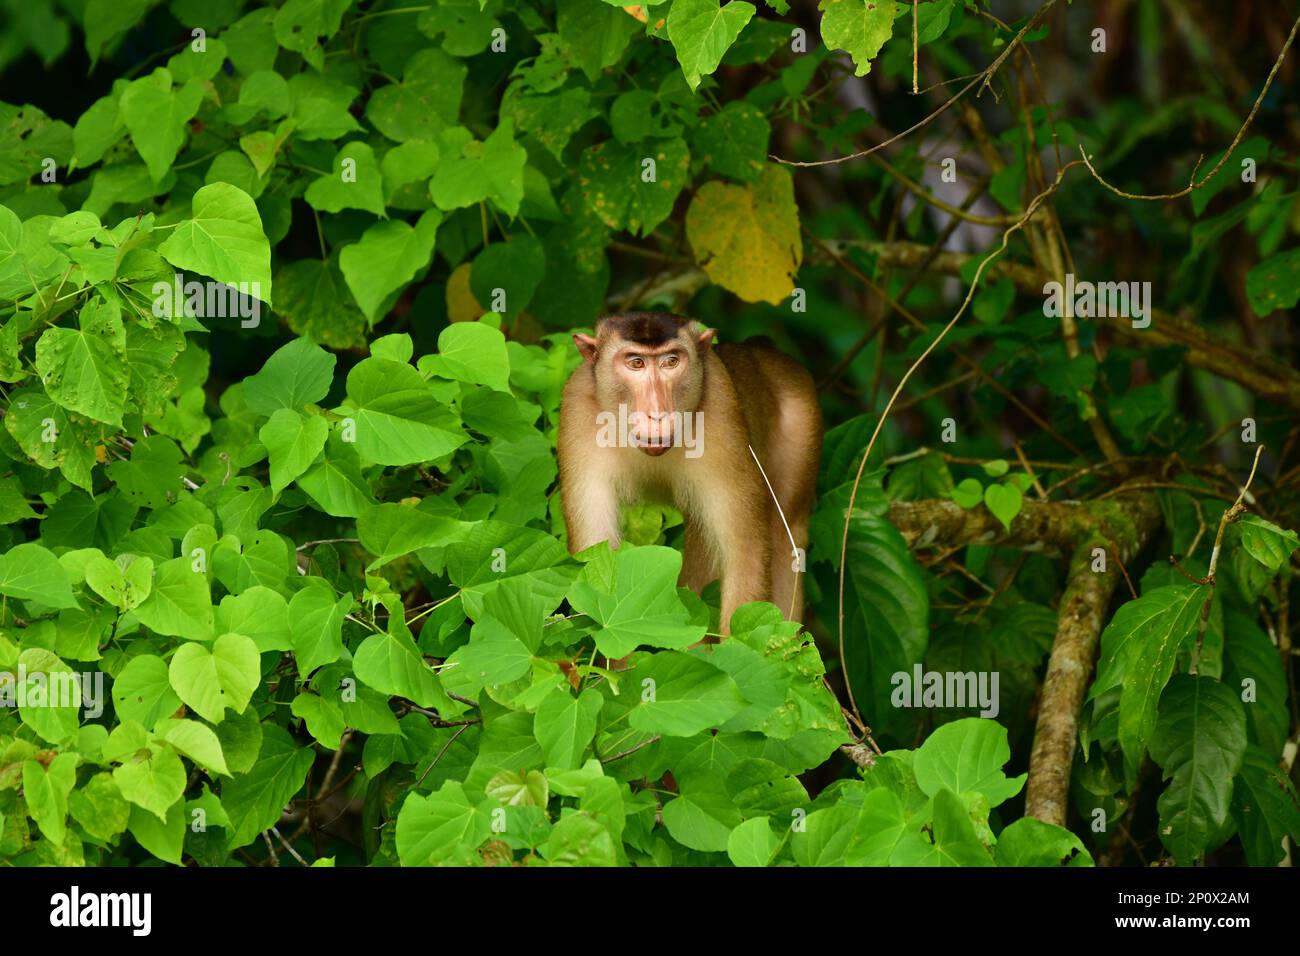 Southern pig-tailed macaque (Macaca nemestrina) in the rainforest of Sabah, Borneo Stock Photo